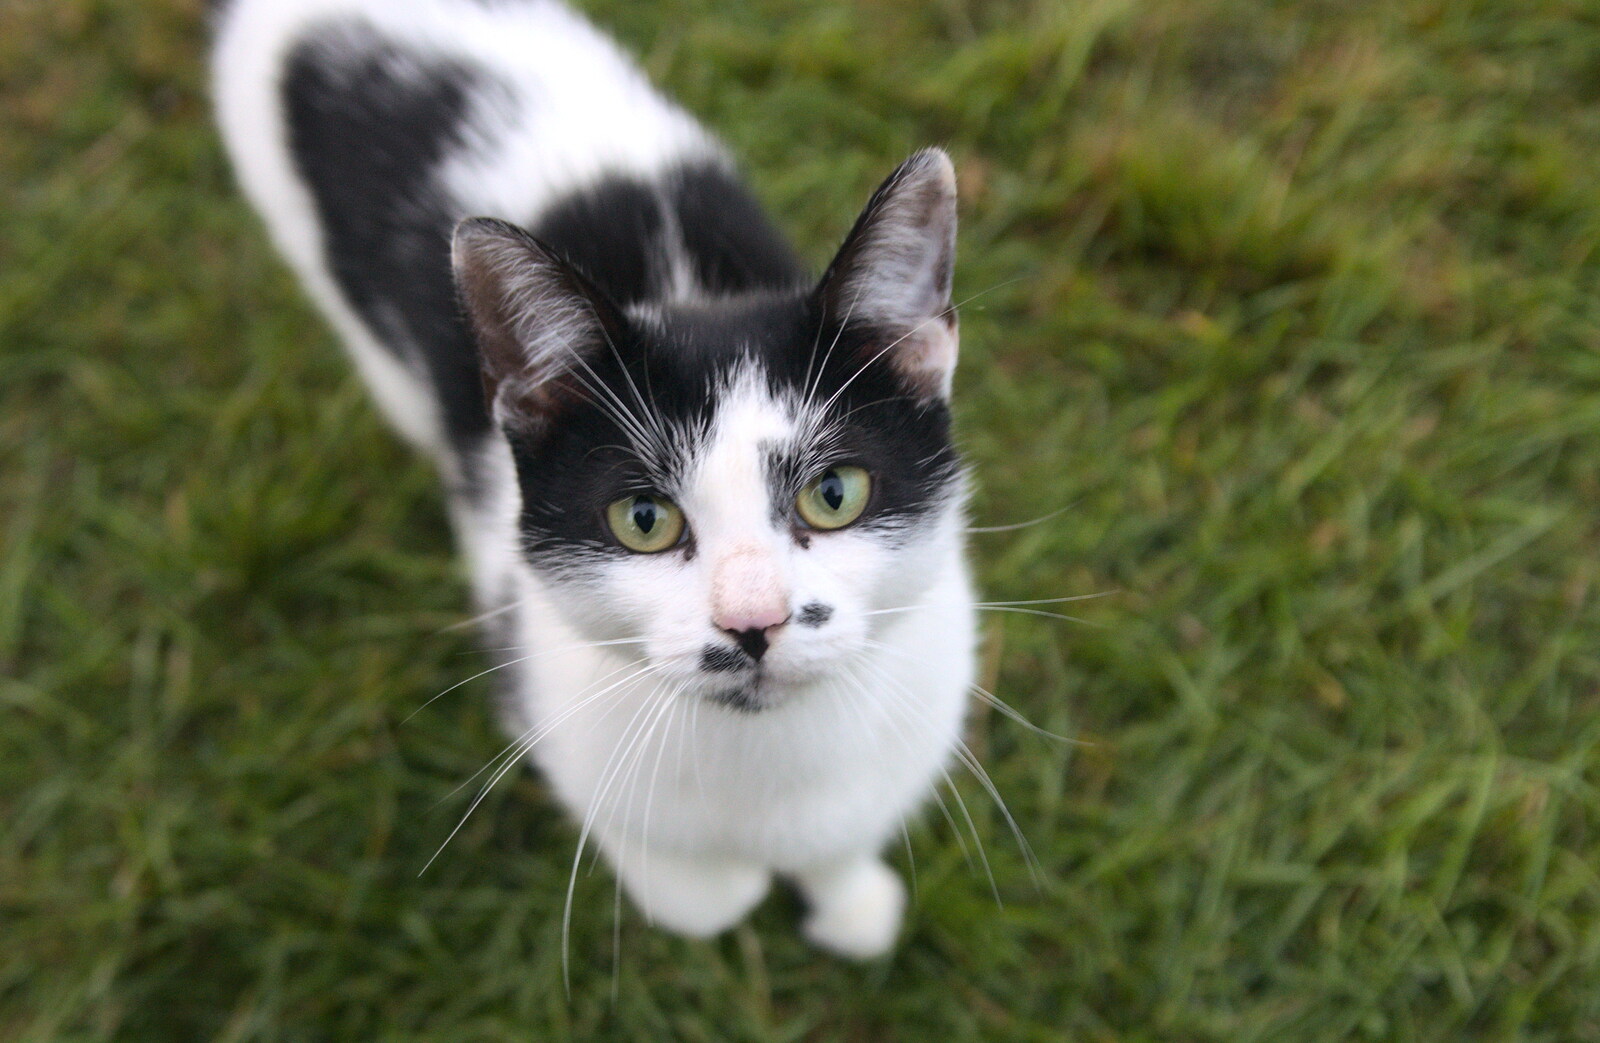 A campsite cat comes over to visit from Camping at Silver Strand, Wicklow, County Wicklow, Ireland - 7th August 2014